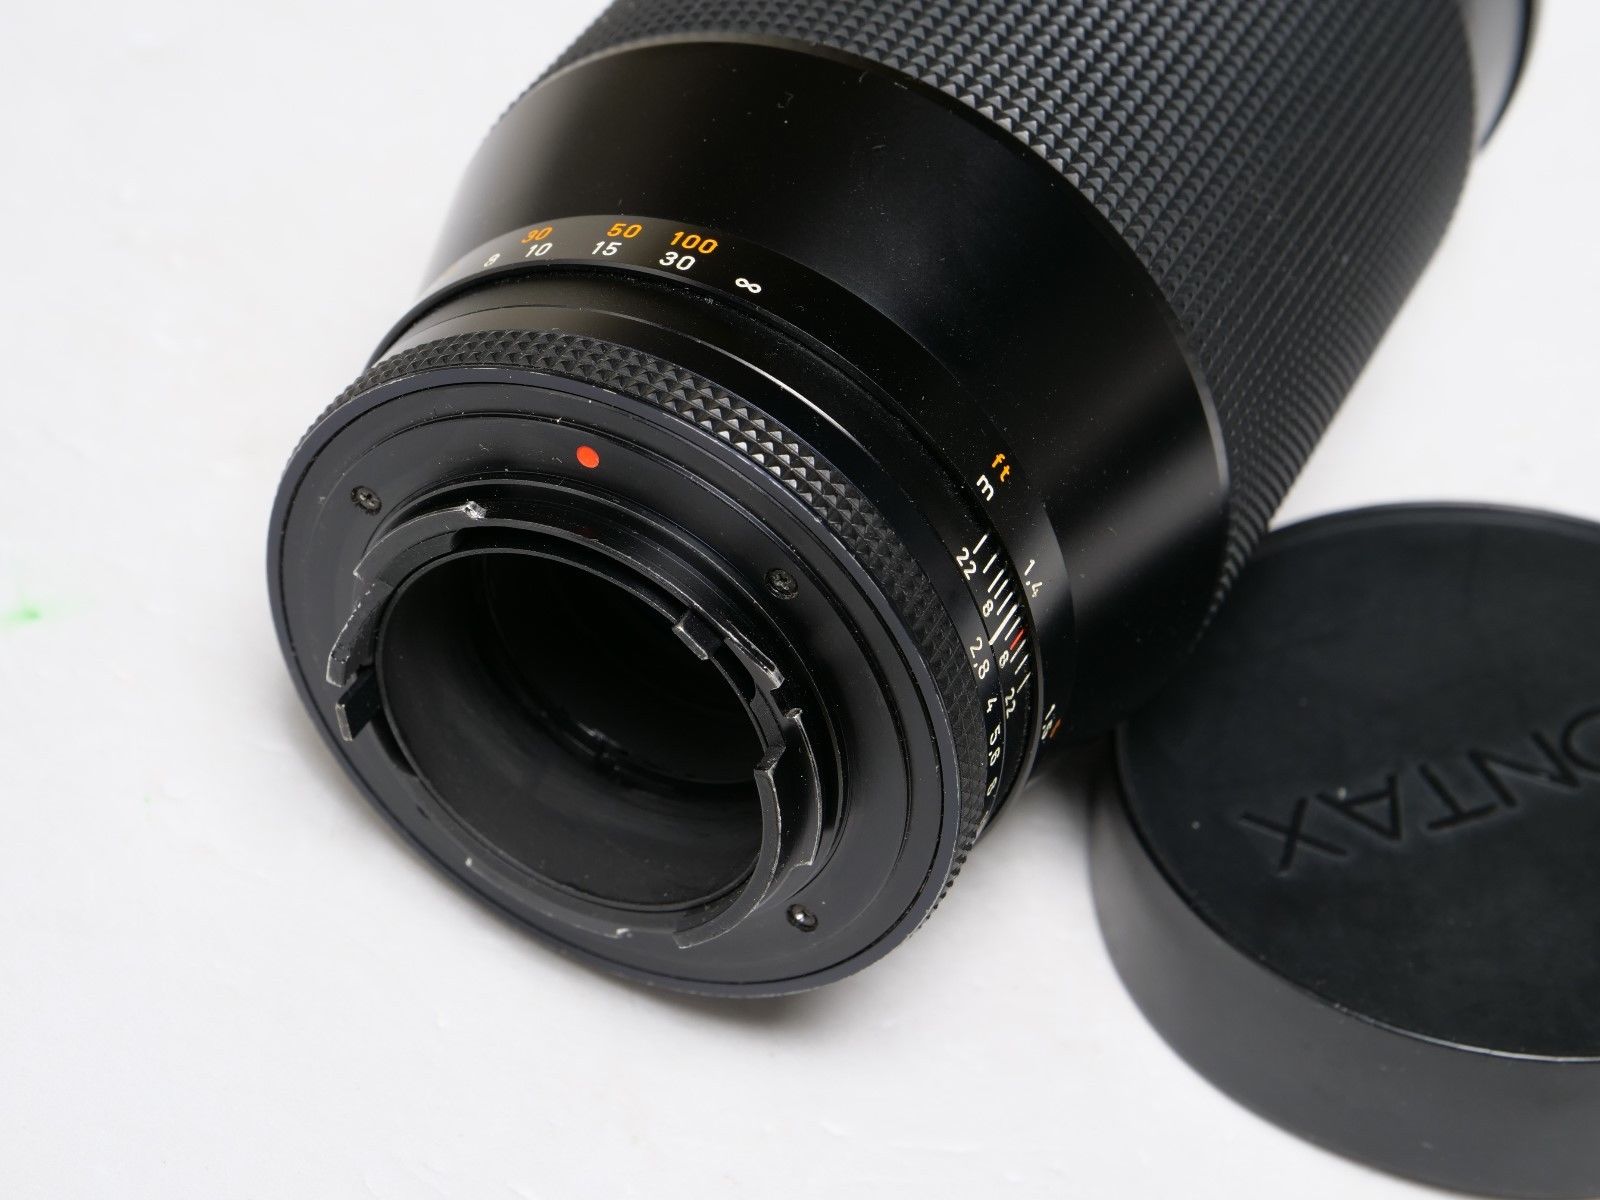 Zeiss 'Contax' Sonnar 180mm f/2.8, a fast, heavyweight quality